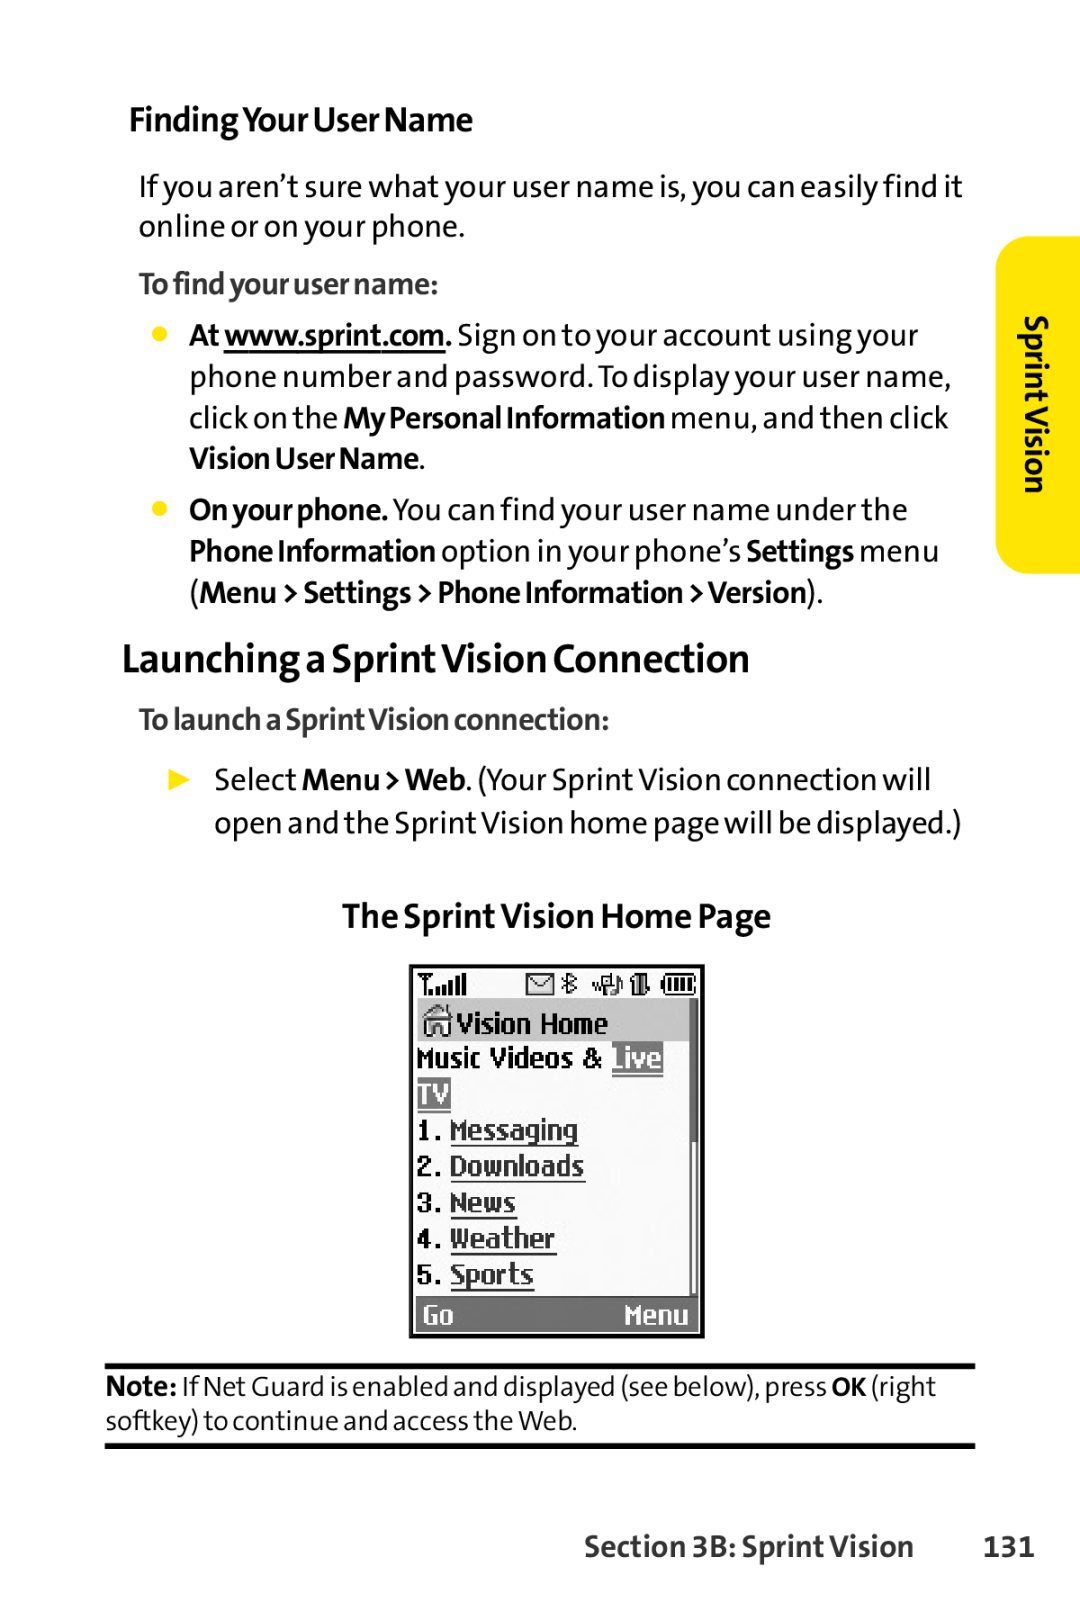 Sprint Nextel LX160 Launchinga SprintVision Connection, FindingYourUserName, The SprintVision Home Page, Sprint Vision 